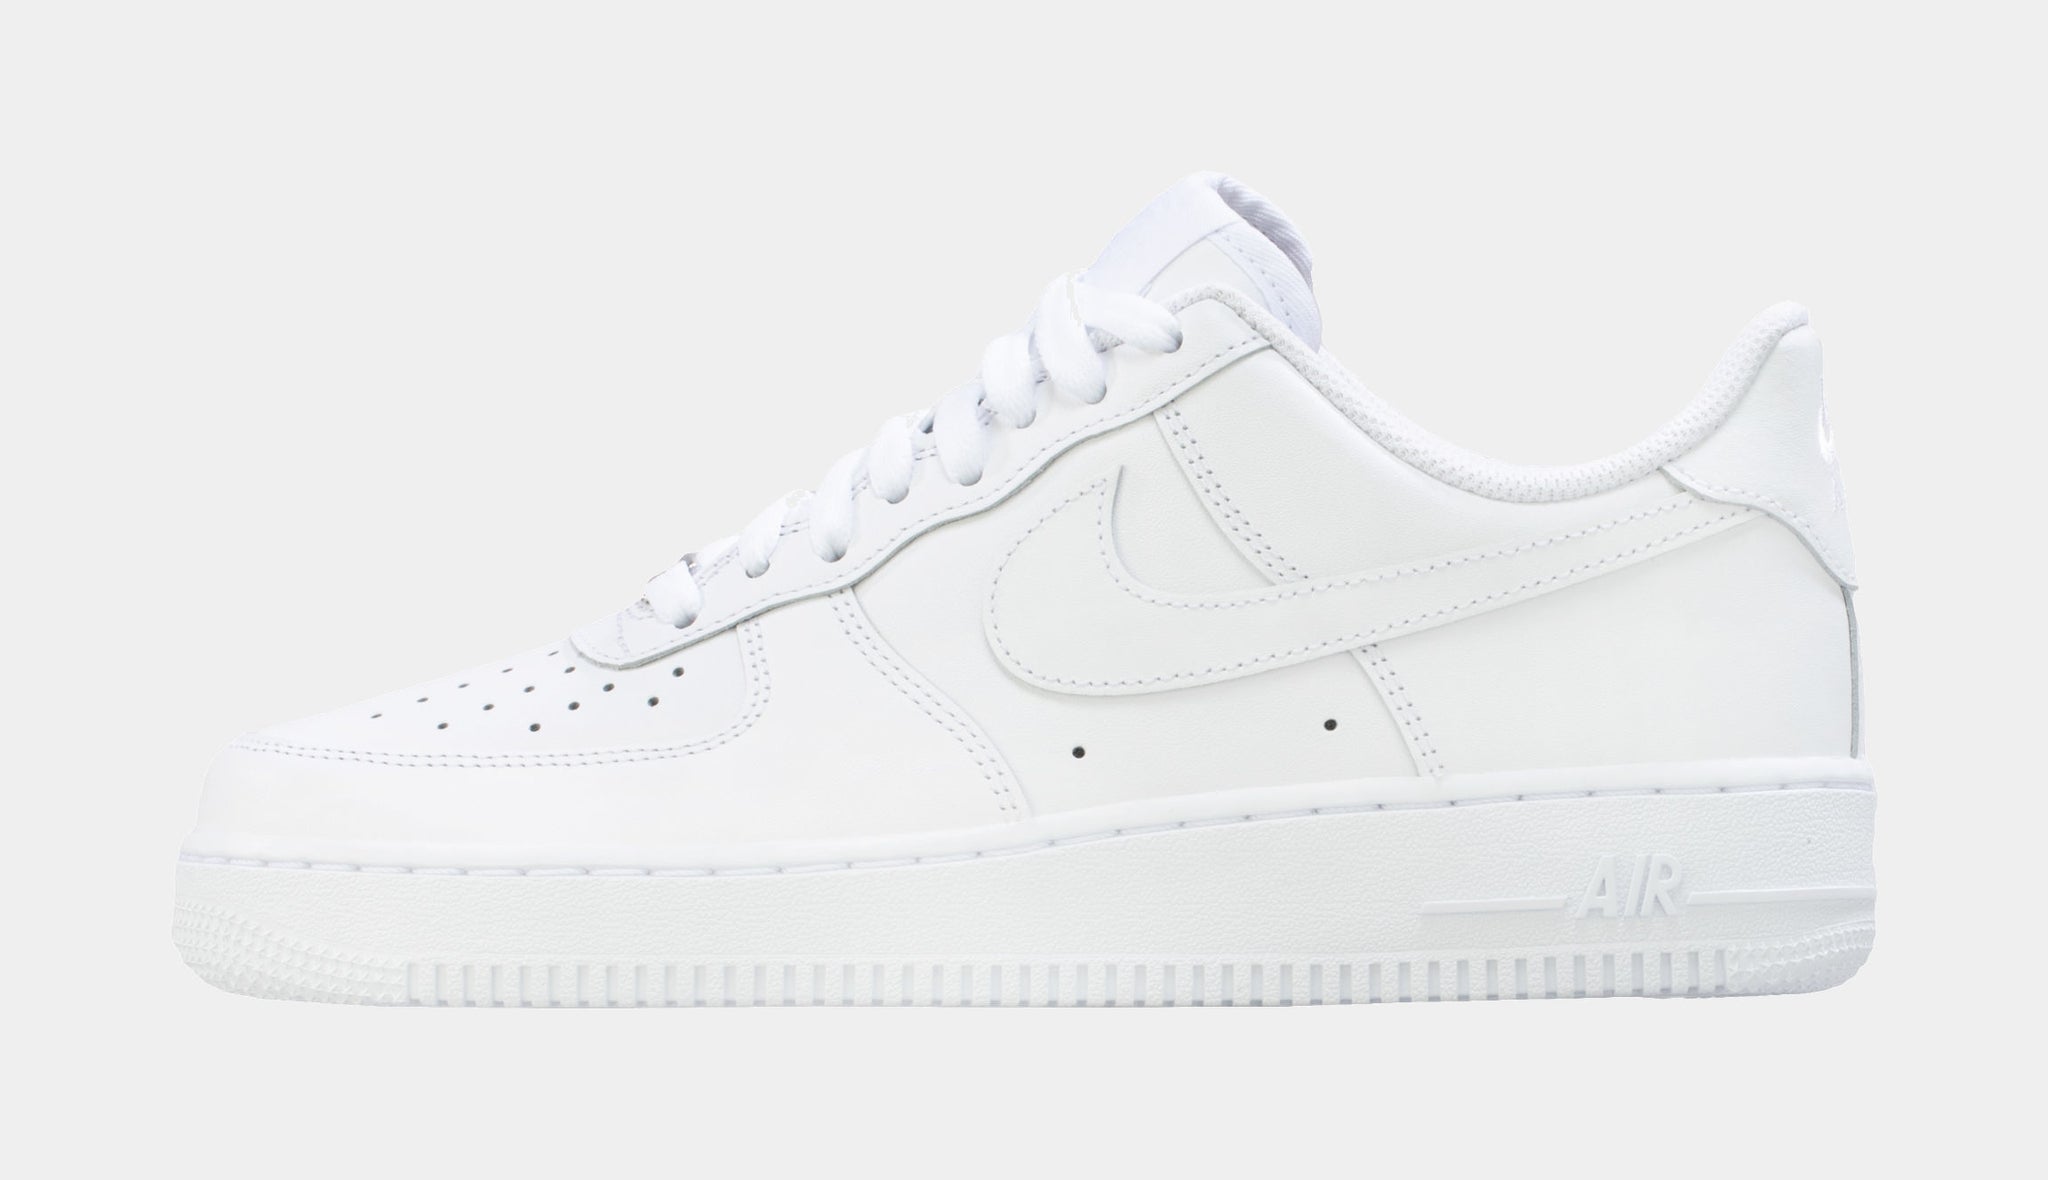  Nike Mens Air Force 1 Low 07 315122 111 White on White - Size  12